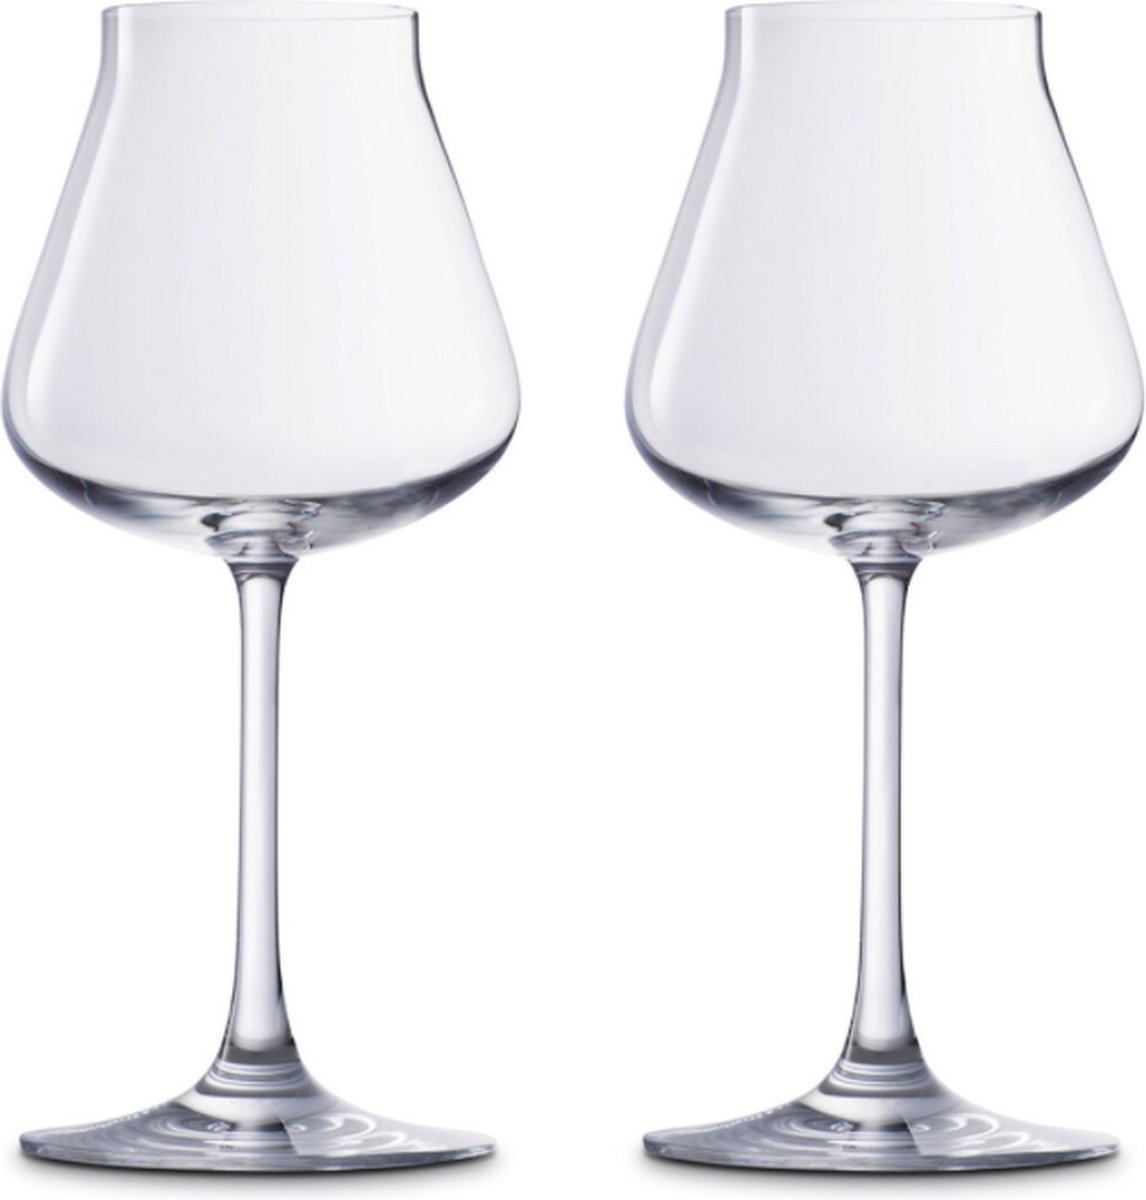 Baccarat Chateau Baccarat -rode wijn glas x2